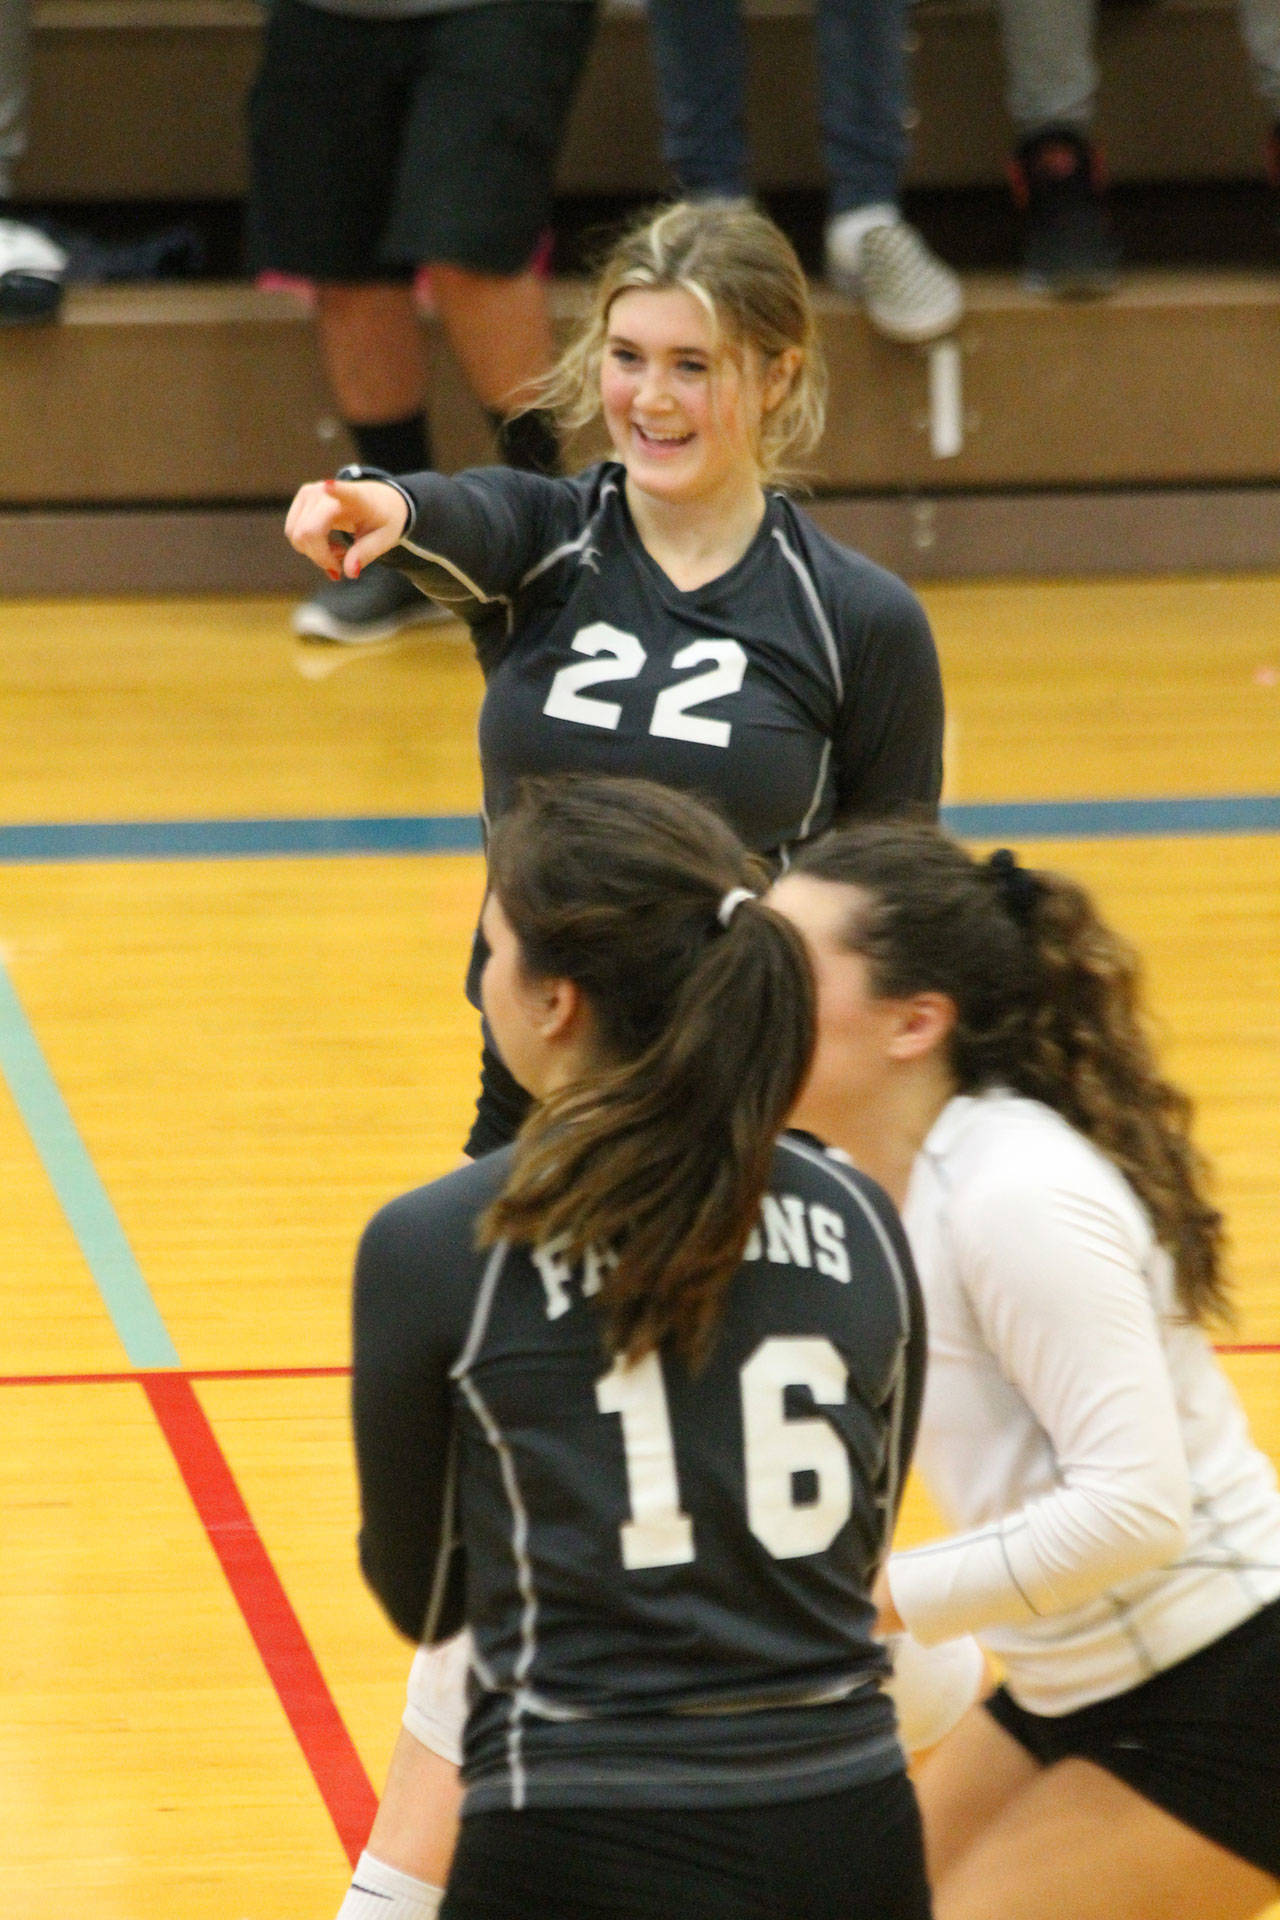 Chloe Johnson points to a teammate after her set led to a kill. (Photo by Jim Waller/South Whidbey Record)